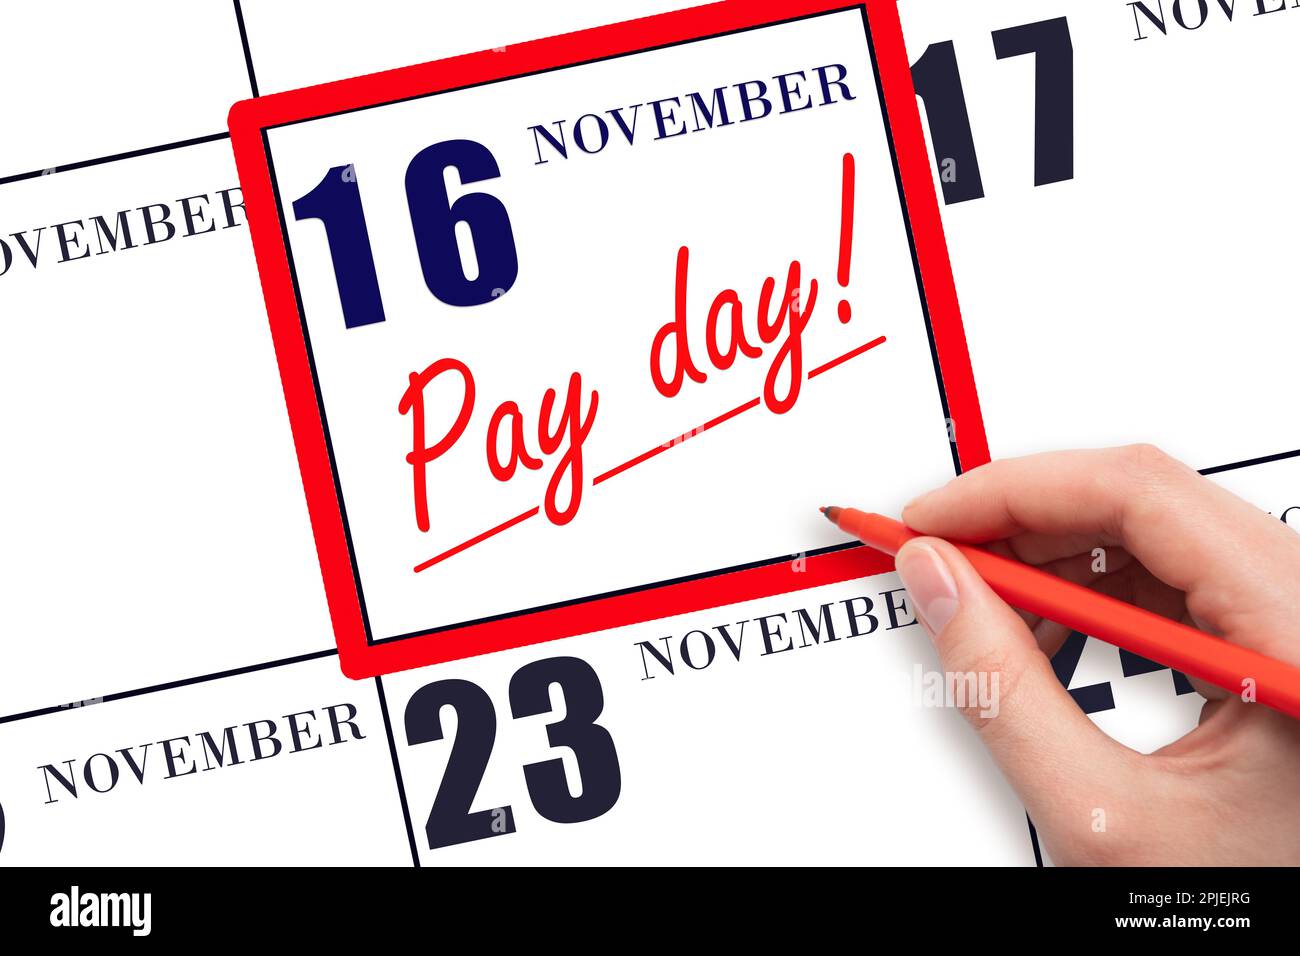 16th day of November. Hand writing text PAY DATE on calendar date November 16 and underline it. Payment due date. Reminder concept of payment. Autumn Stock Photo